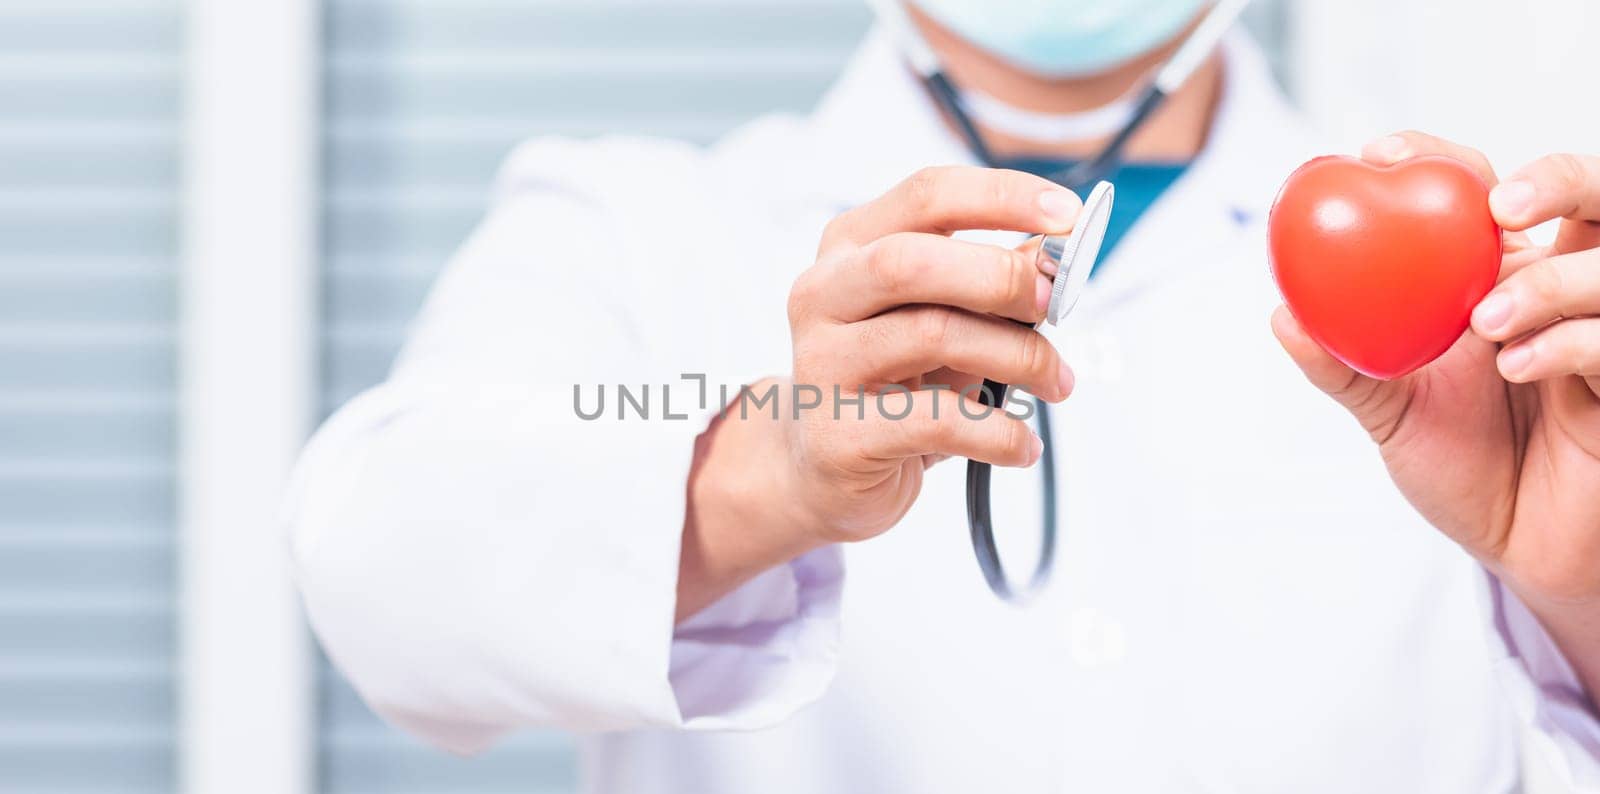 Doctor Day Concept. Doctor man wearing white coat standing holds his stethoscope on hand for listening examining red heart, person showing medical equipment, healthcare close up view